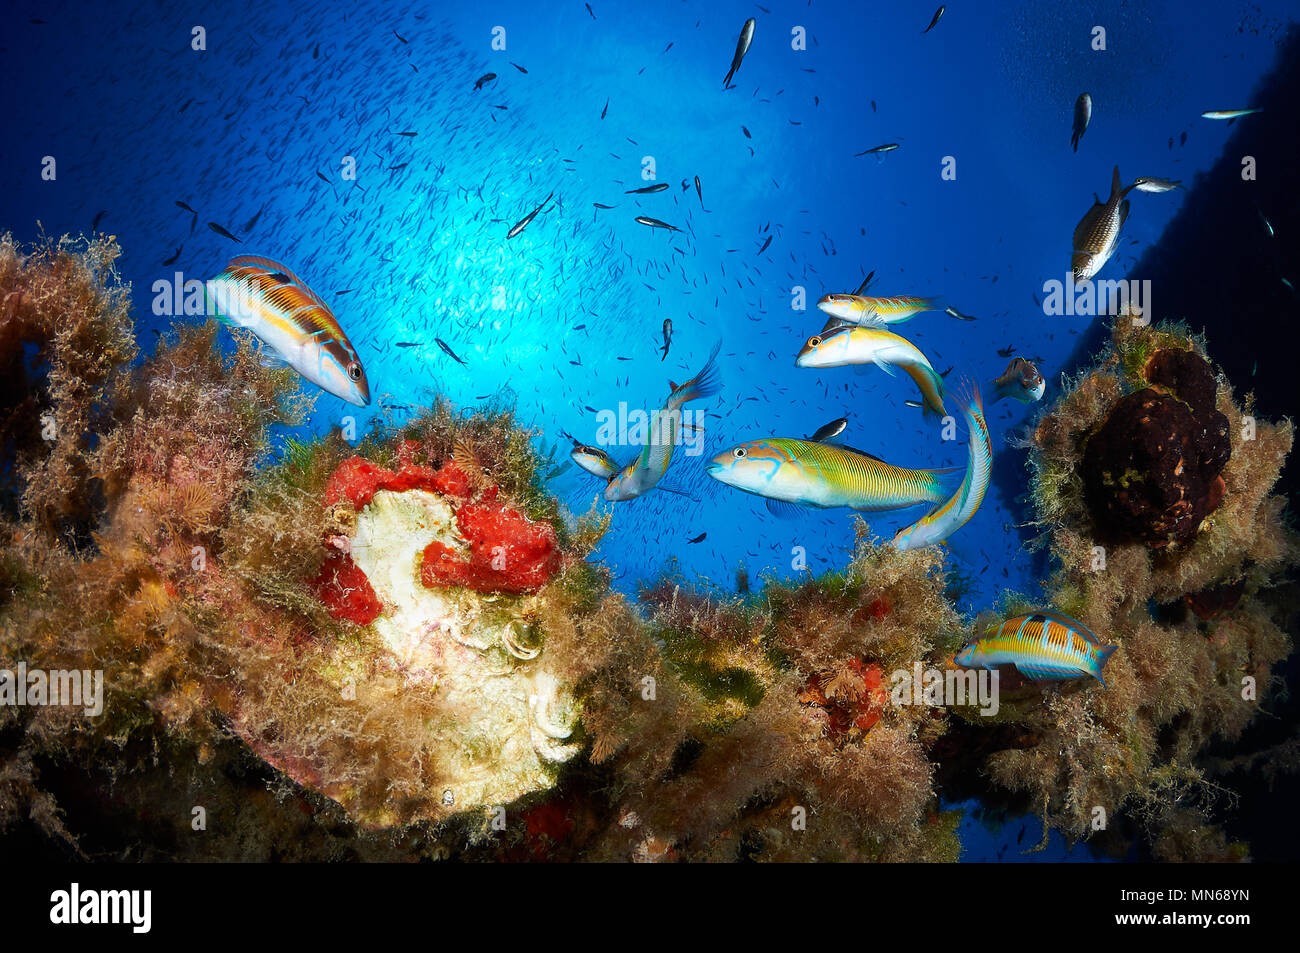 A group of ornate wrasses (Thalassoma pavo) with a fish shoal in the background at La Plataforma wreck dive site in Formentera(Balearic Islands,Spain) Stock Photo